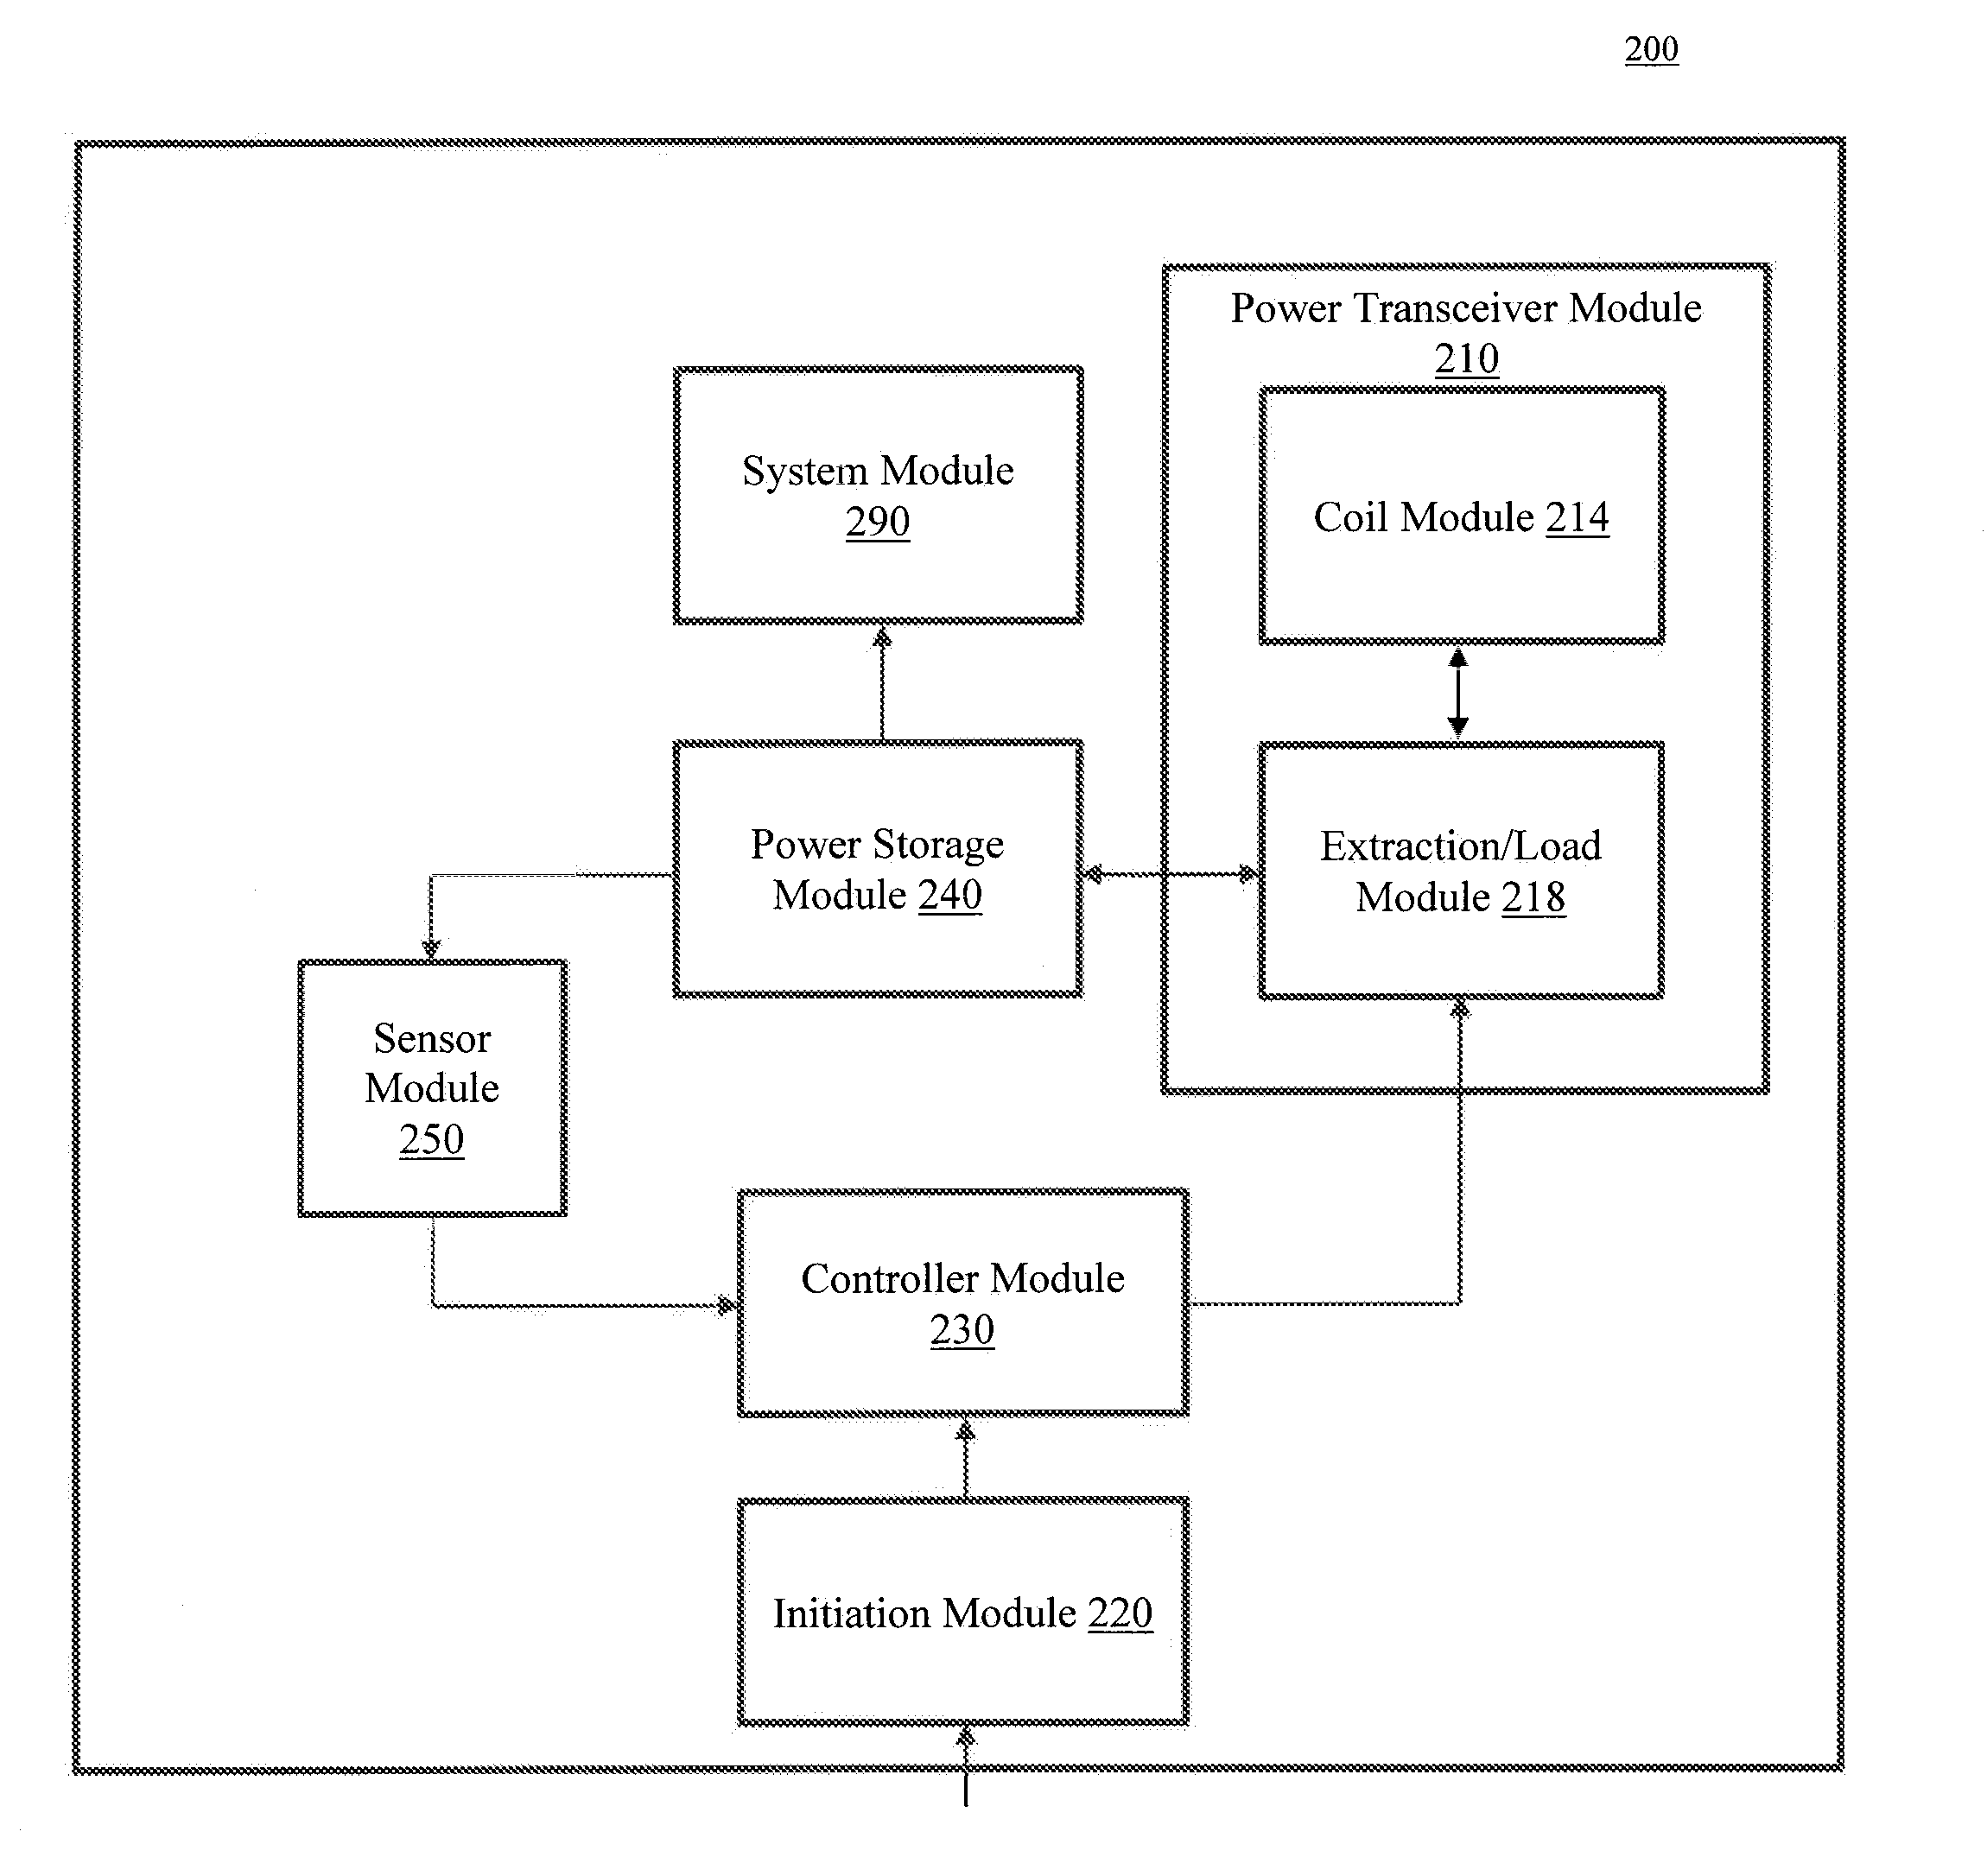 Portable device capable of wireless power reception and transmission